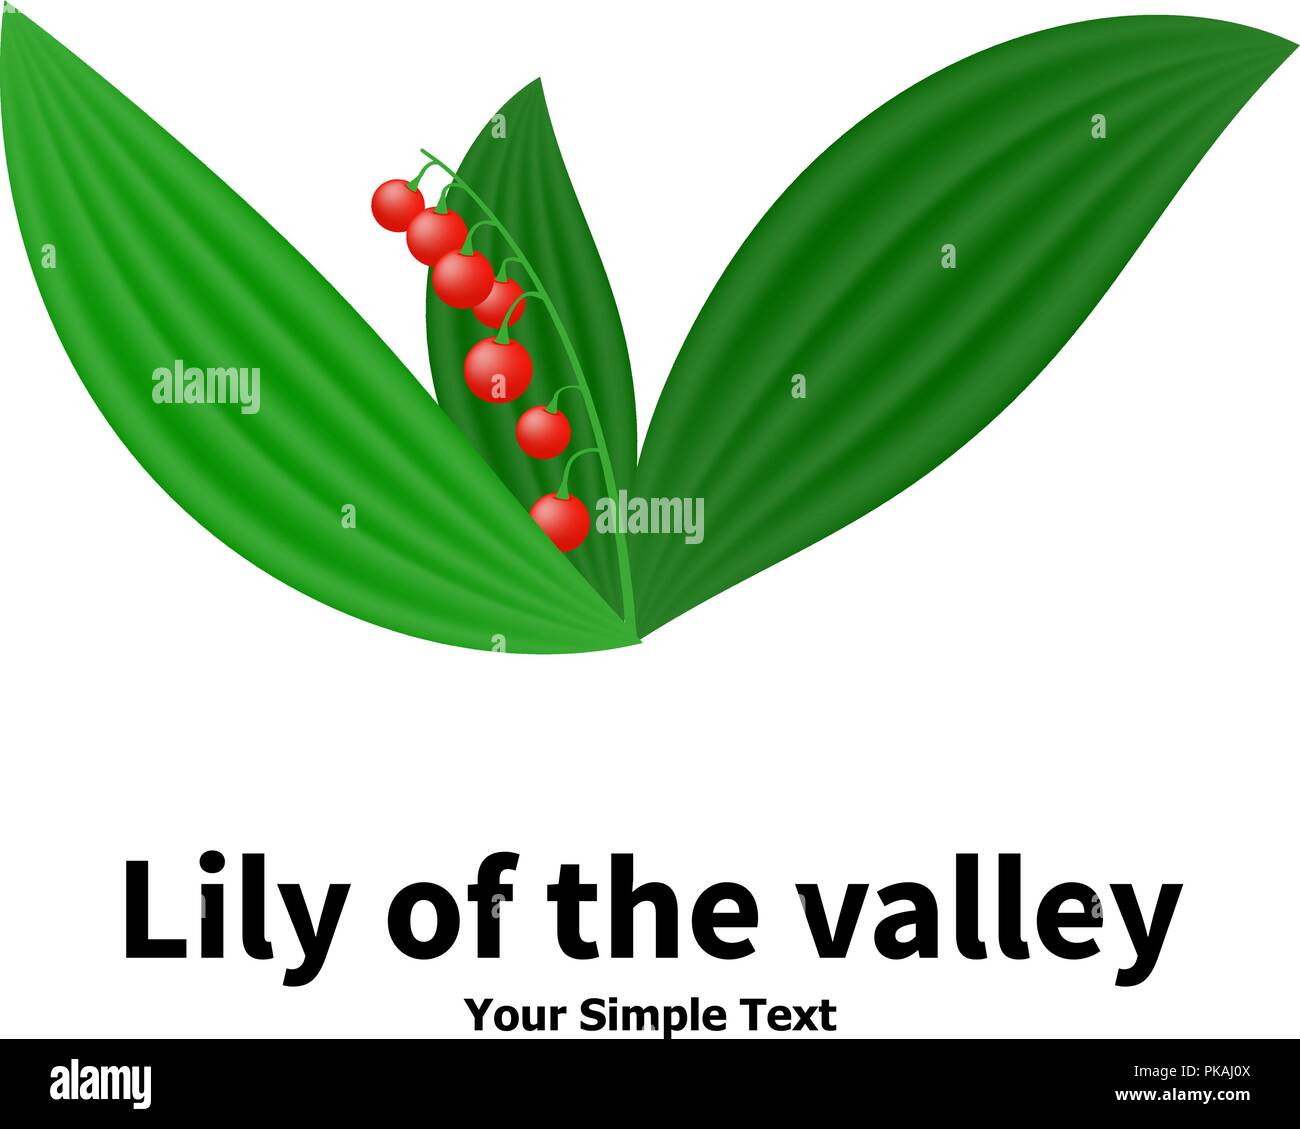 Plant with poisonous berries lily of the valley Stock Vector